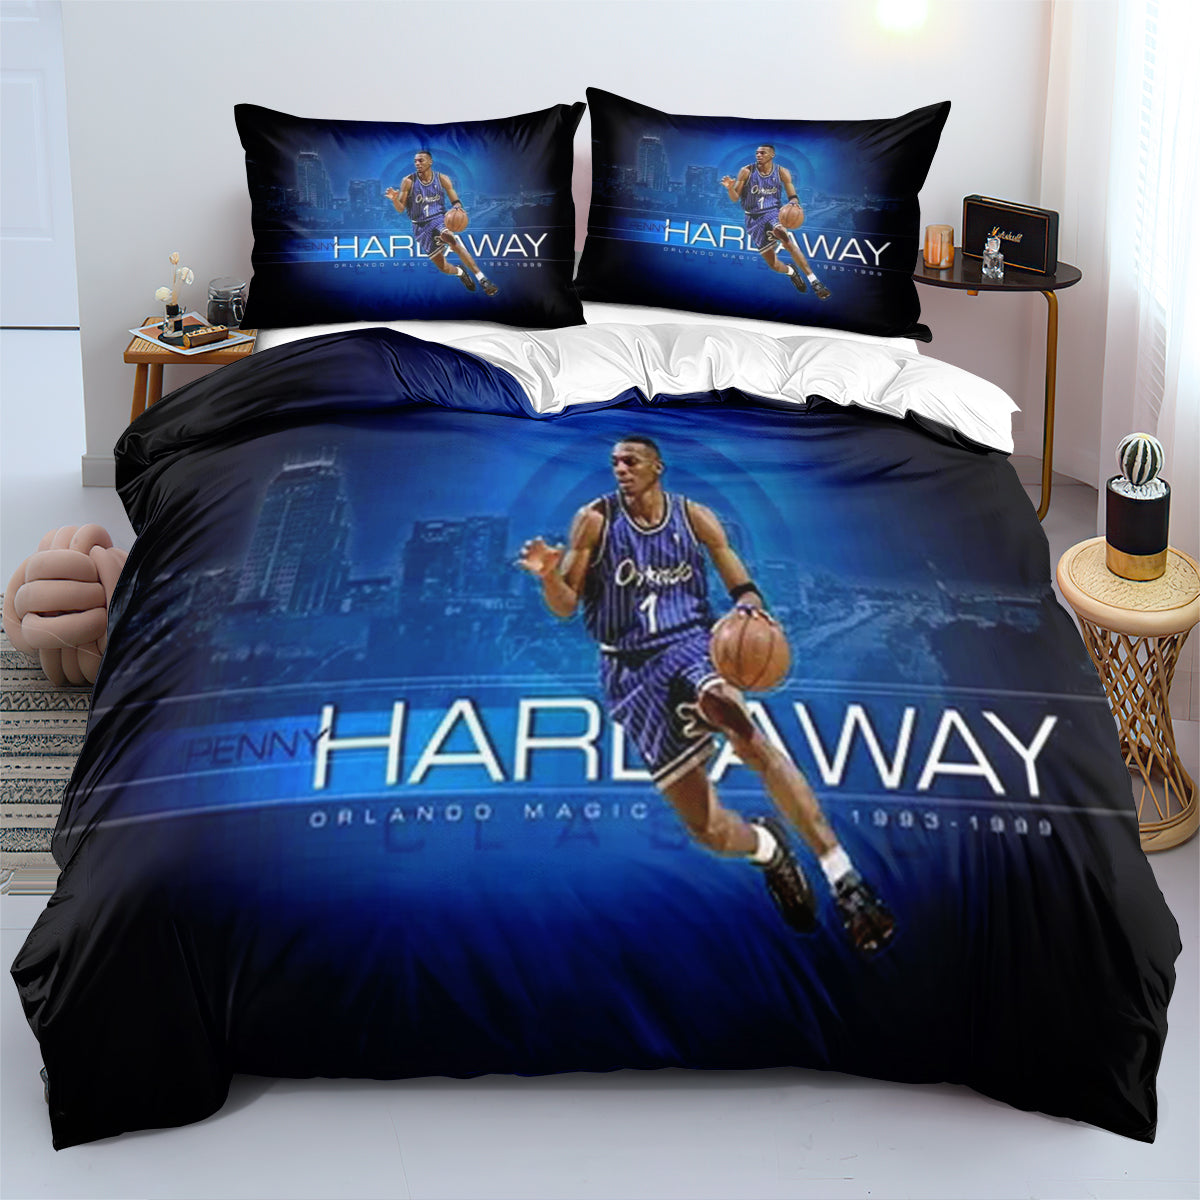 Orlando Basketball Magic Bedding Set Quilt Cover Without Filler